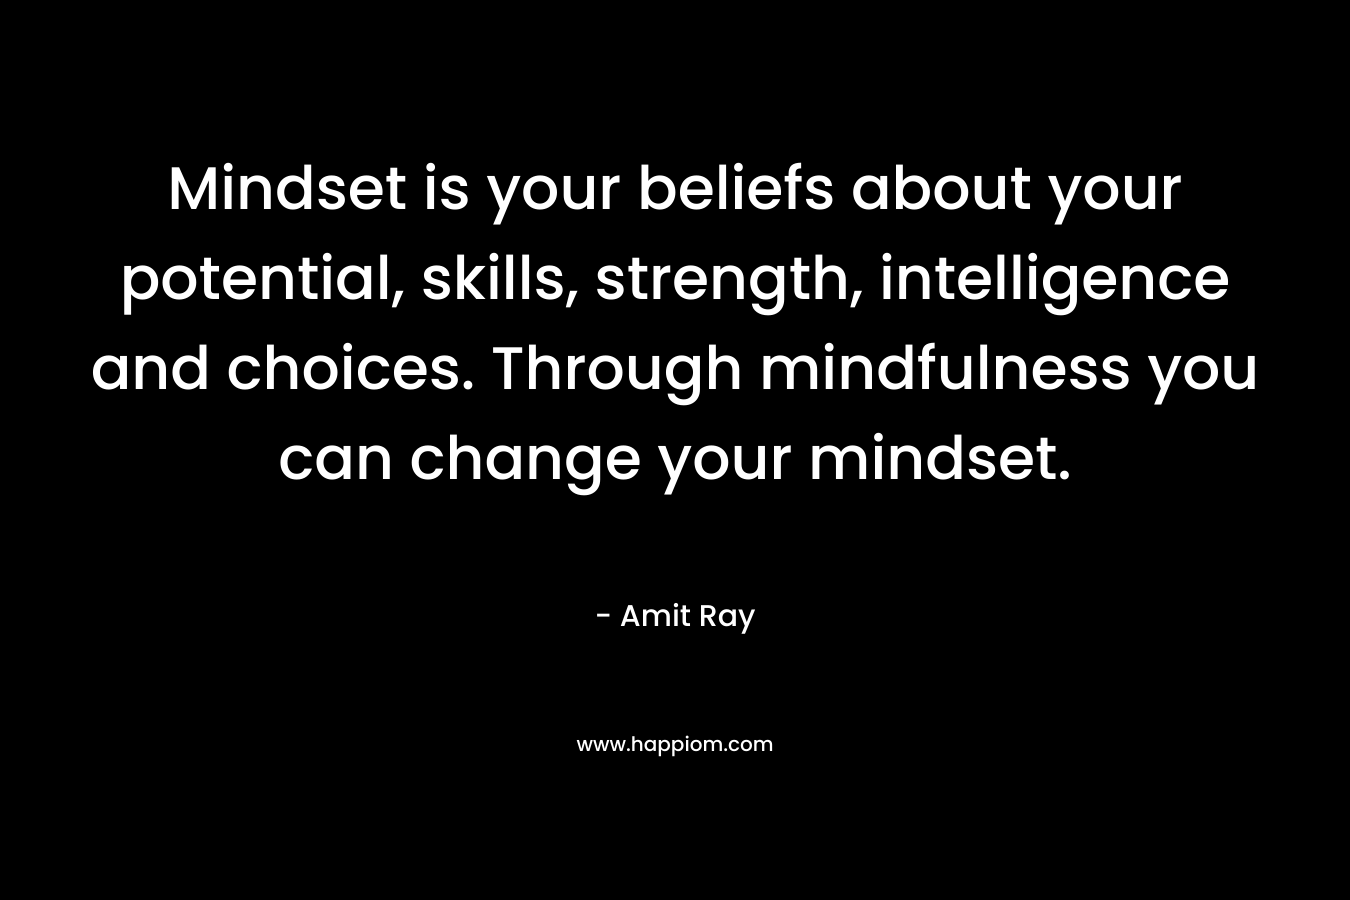 Mindset is your beliefs about your potential, skills, strength, intelligence and choices. Through mindfulness you can change your mindset.